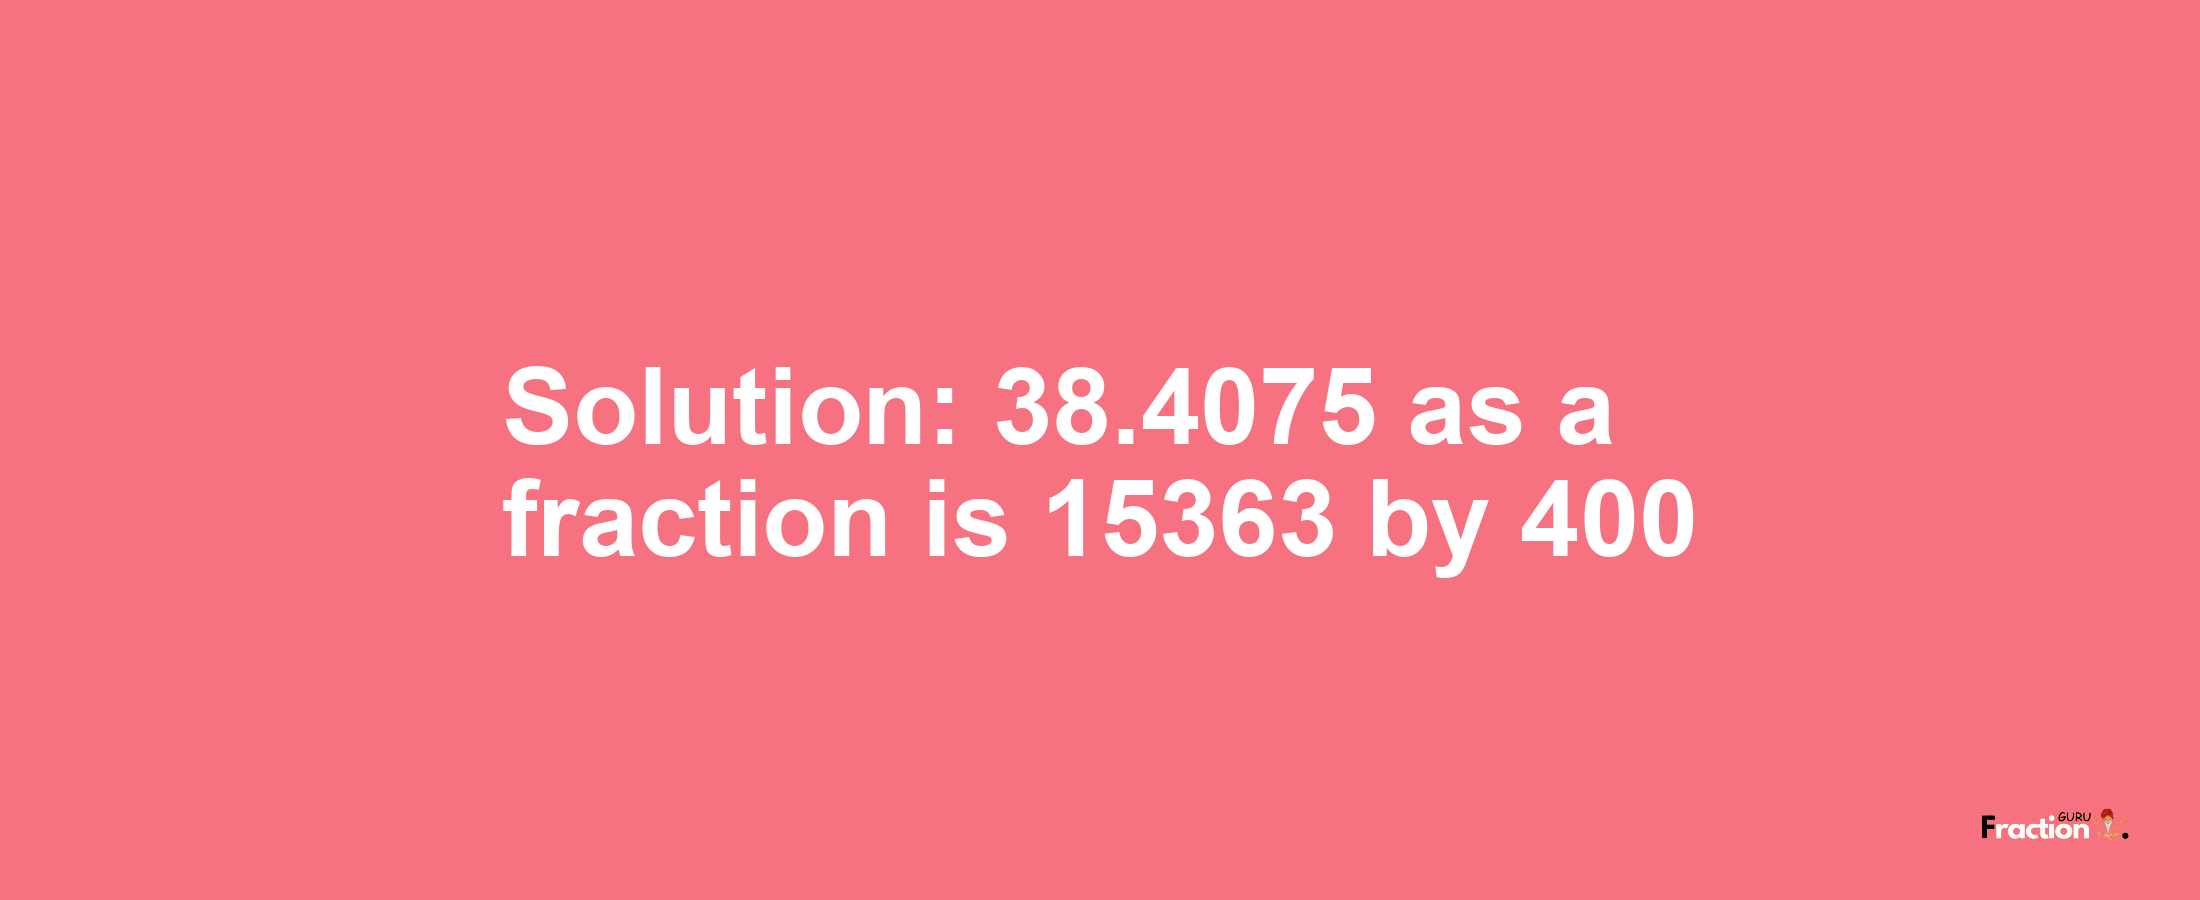 Solution:38.4075 as a fraction is 15363/400